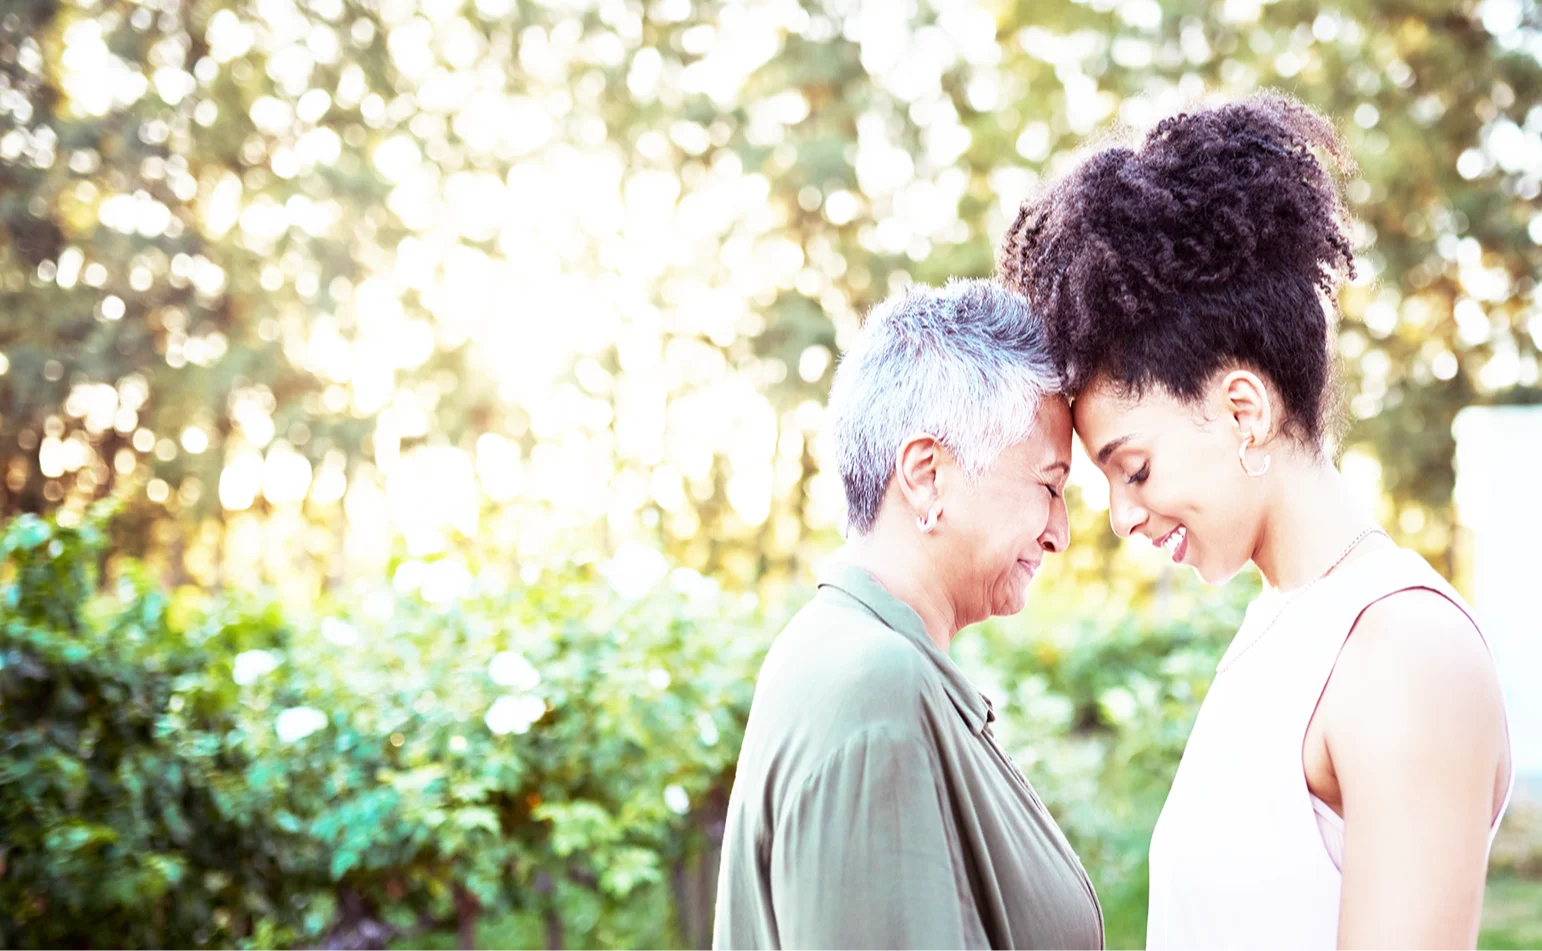 A Black woman with short grey hair smiling and being embraced by a younger smiling Black woman.